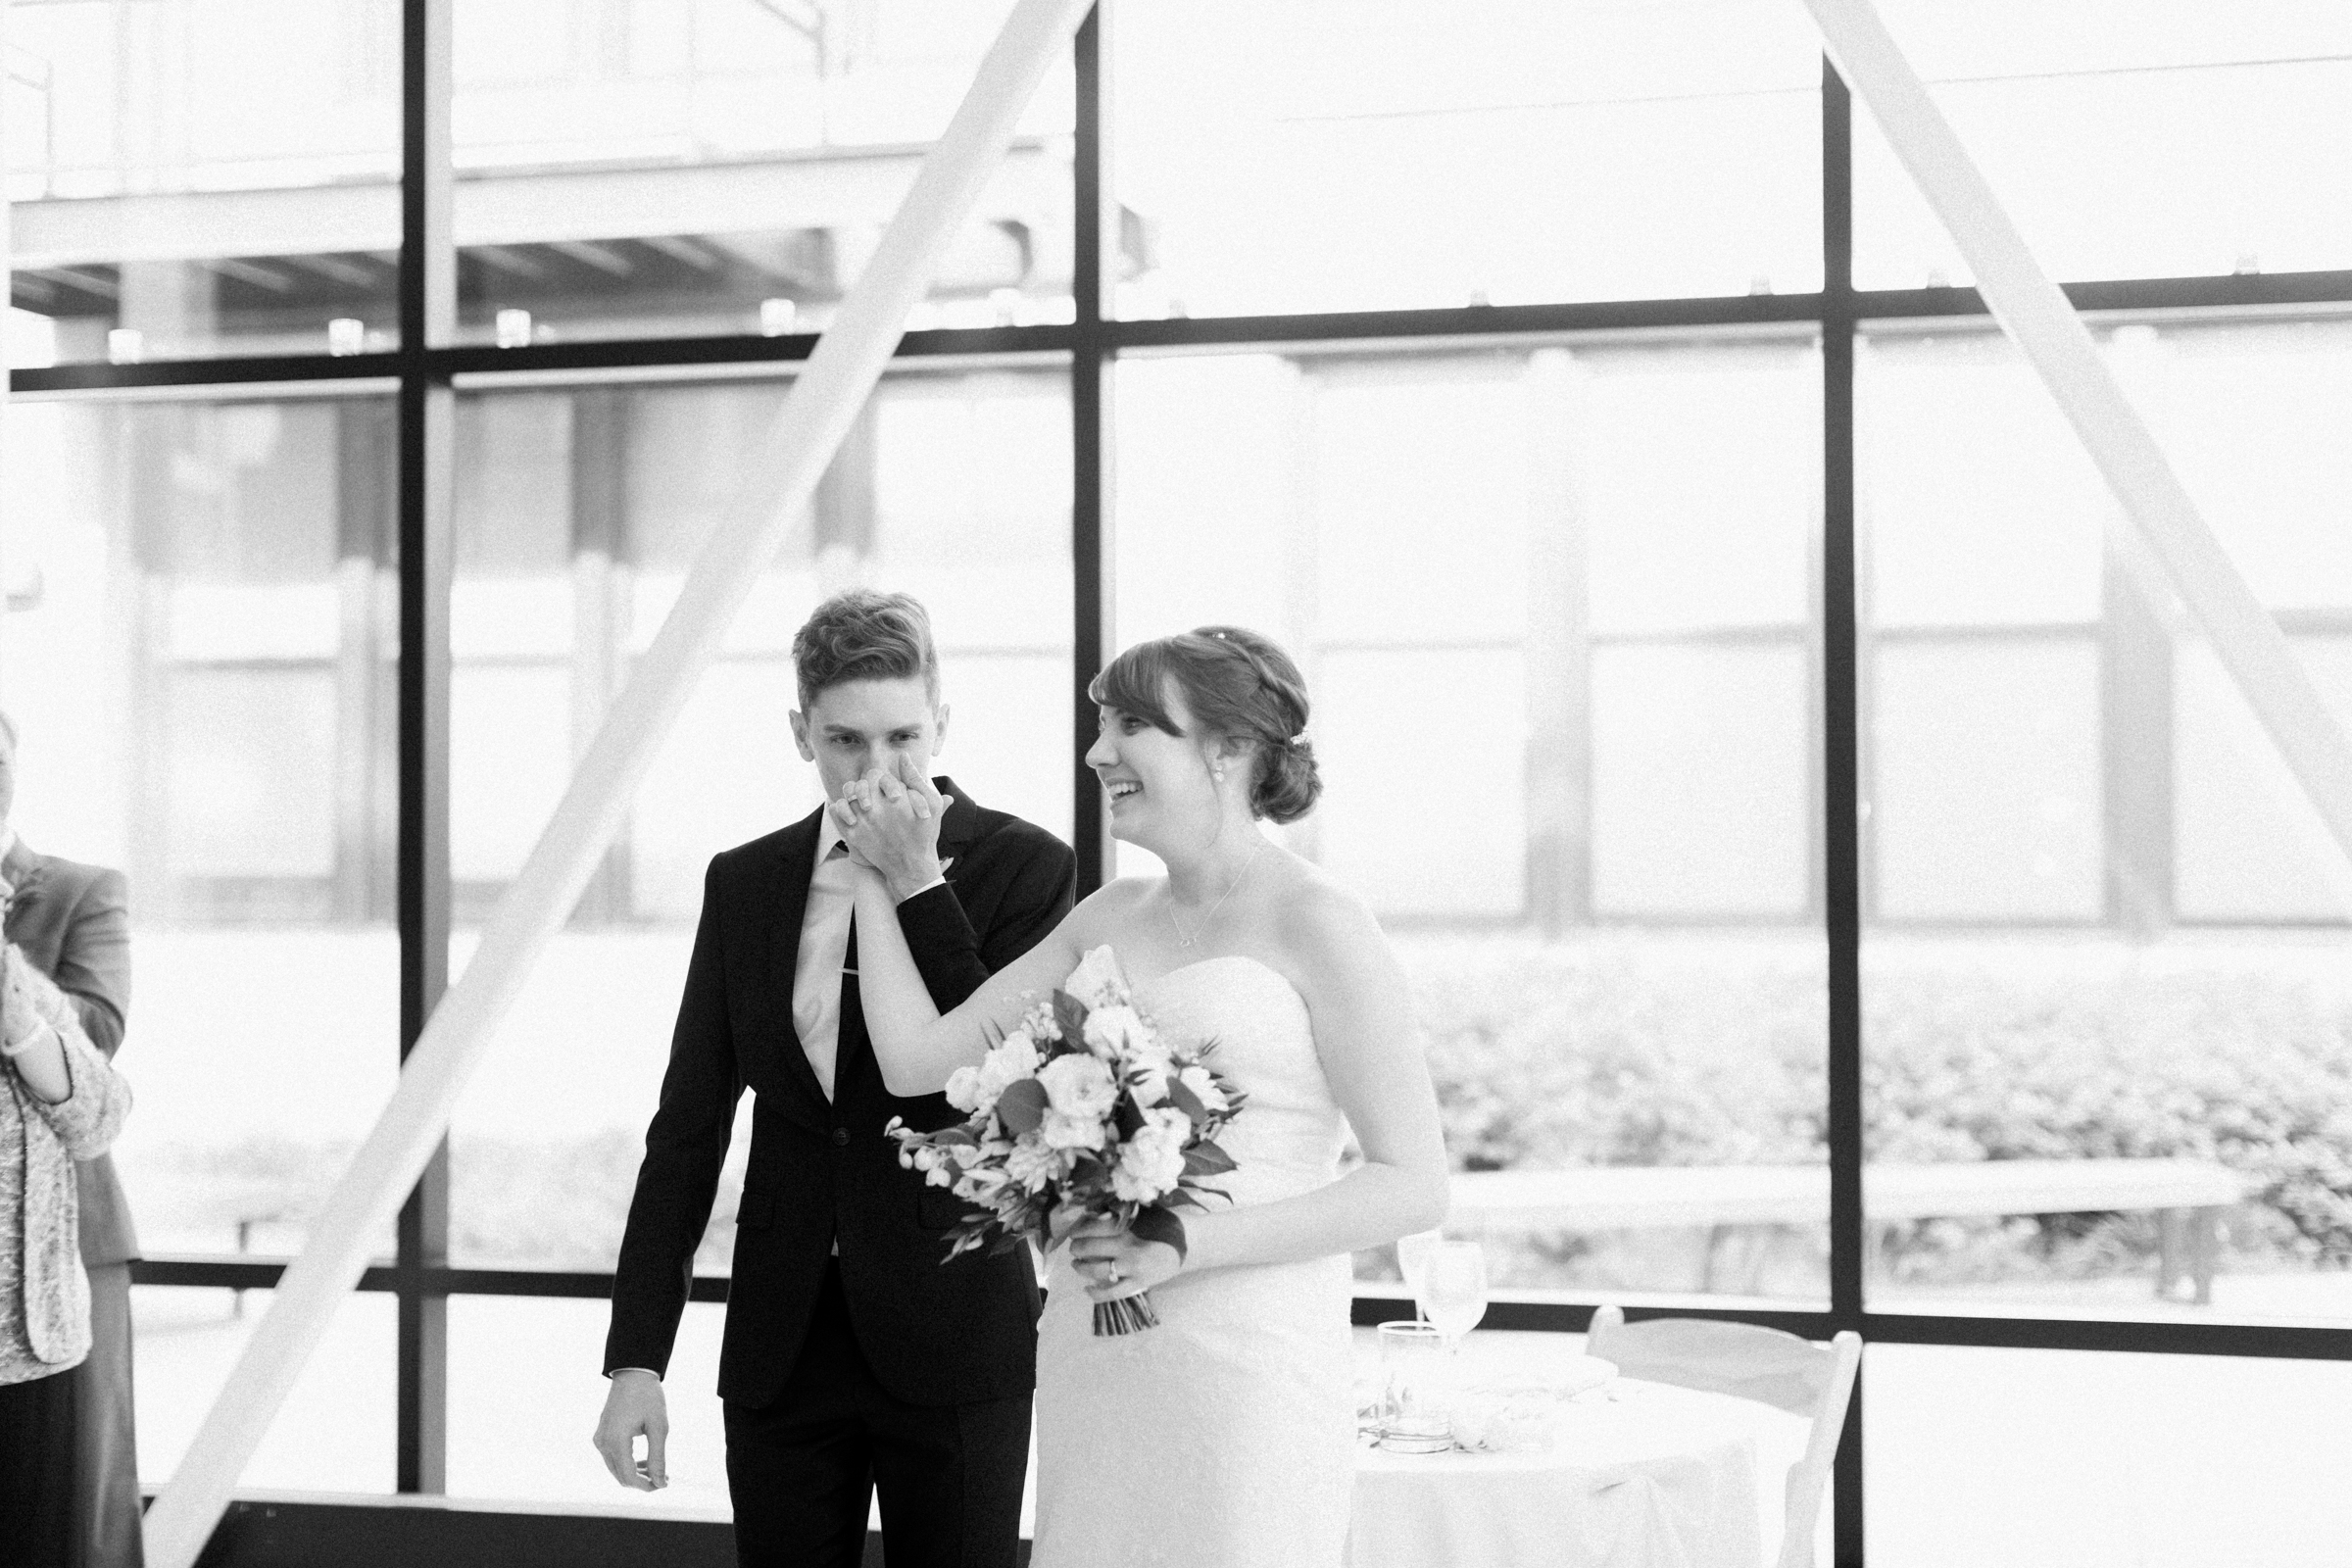 Smiling bride and groom in black and white for Greenhouse Loft minimalist wedding ceremony.